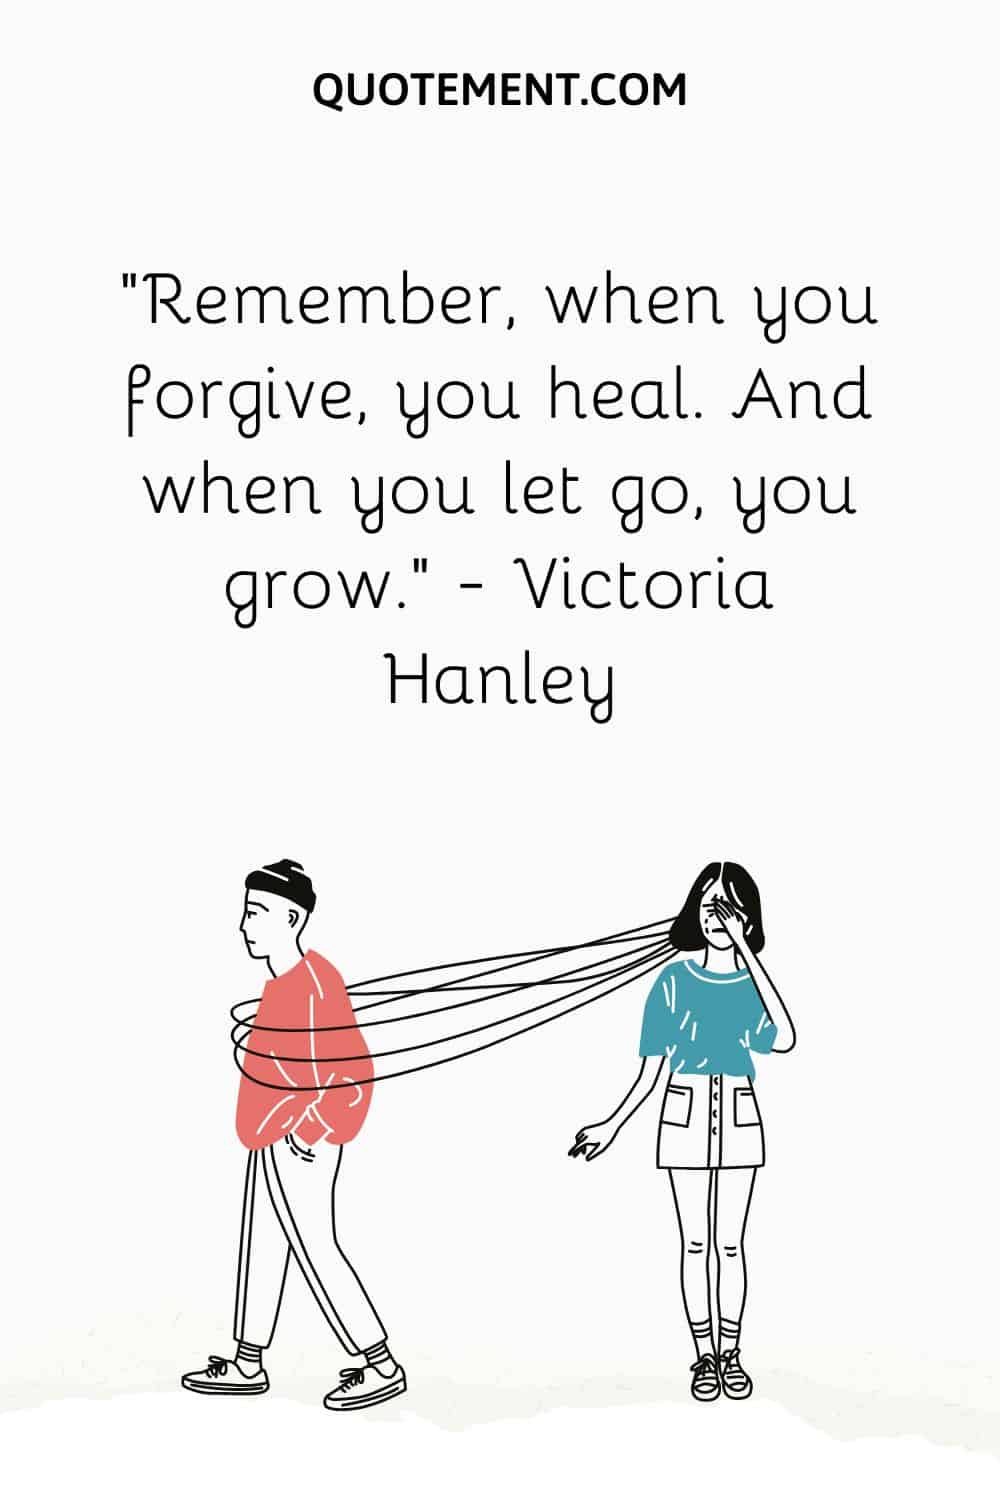 Remember, when you forgive, you heal. And when you let go, you grow